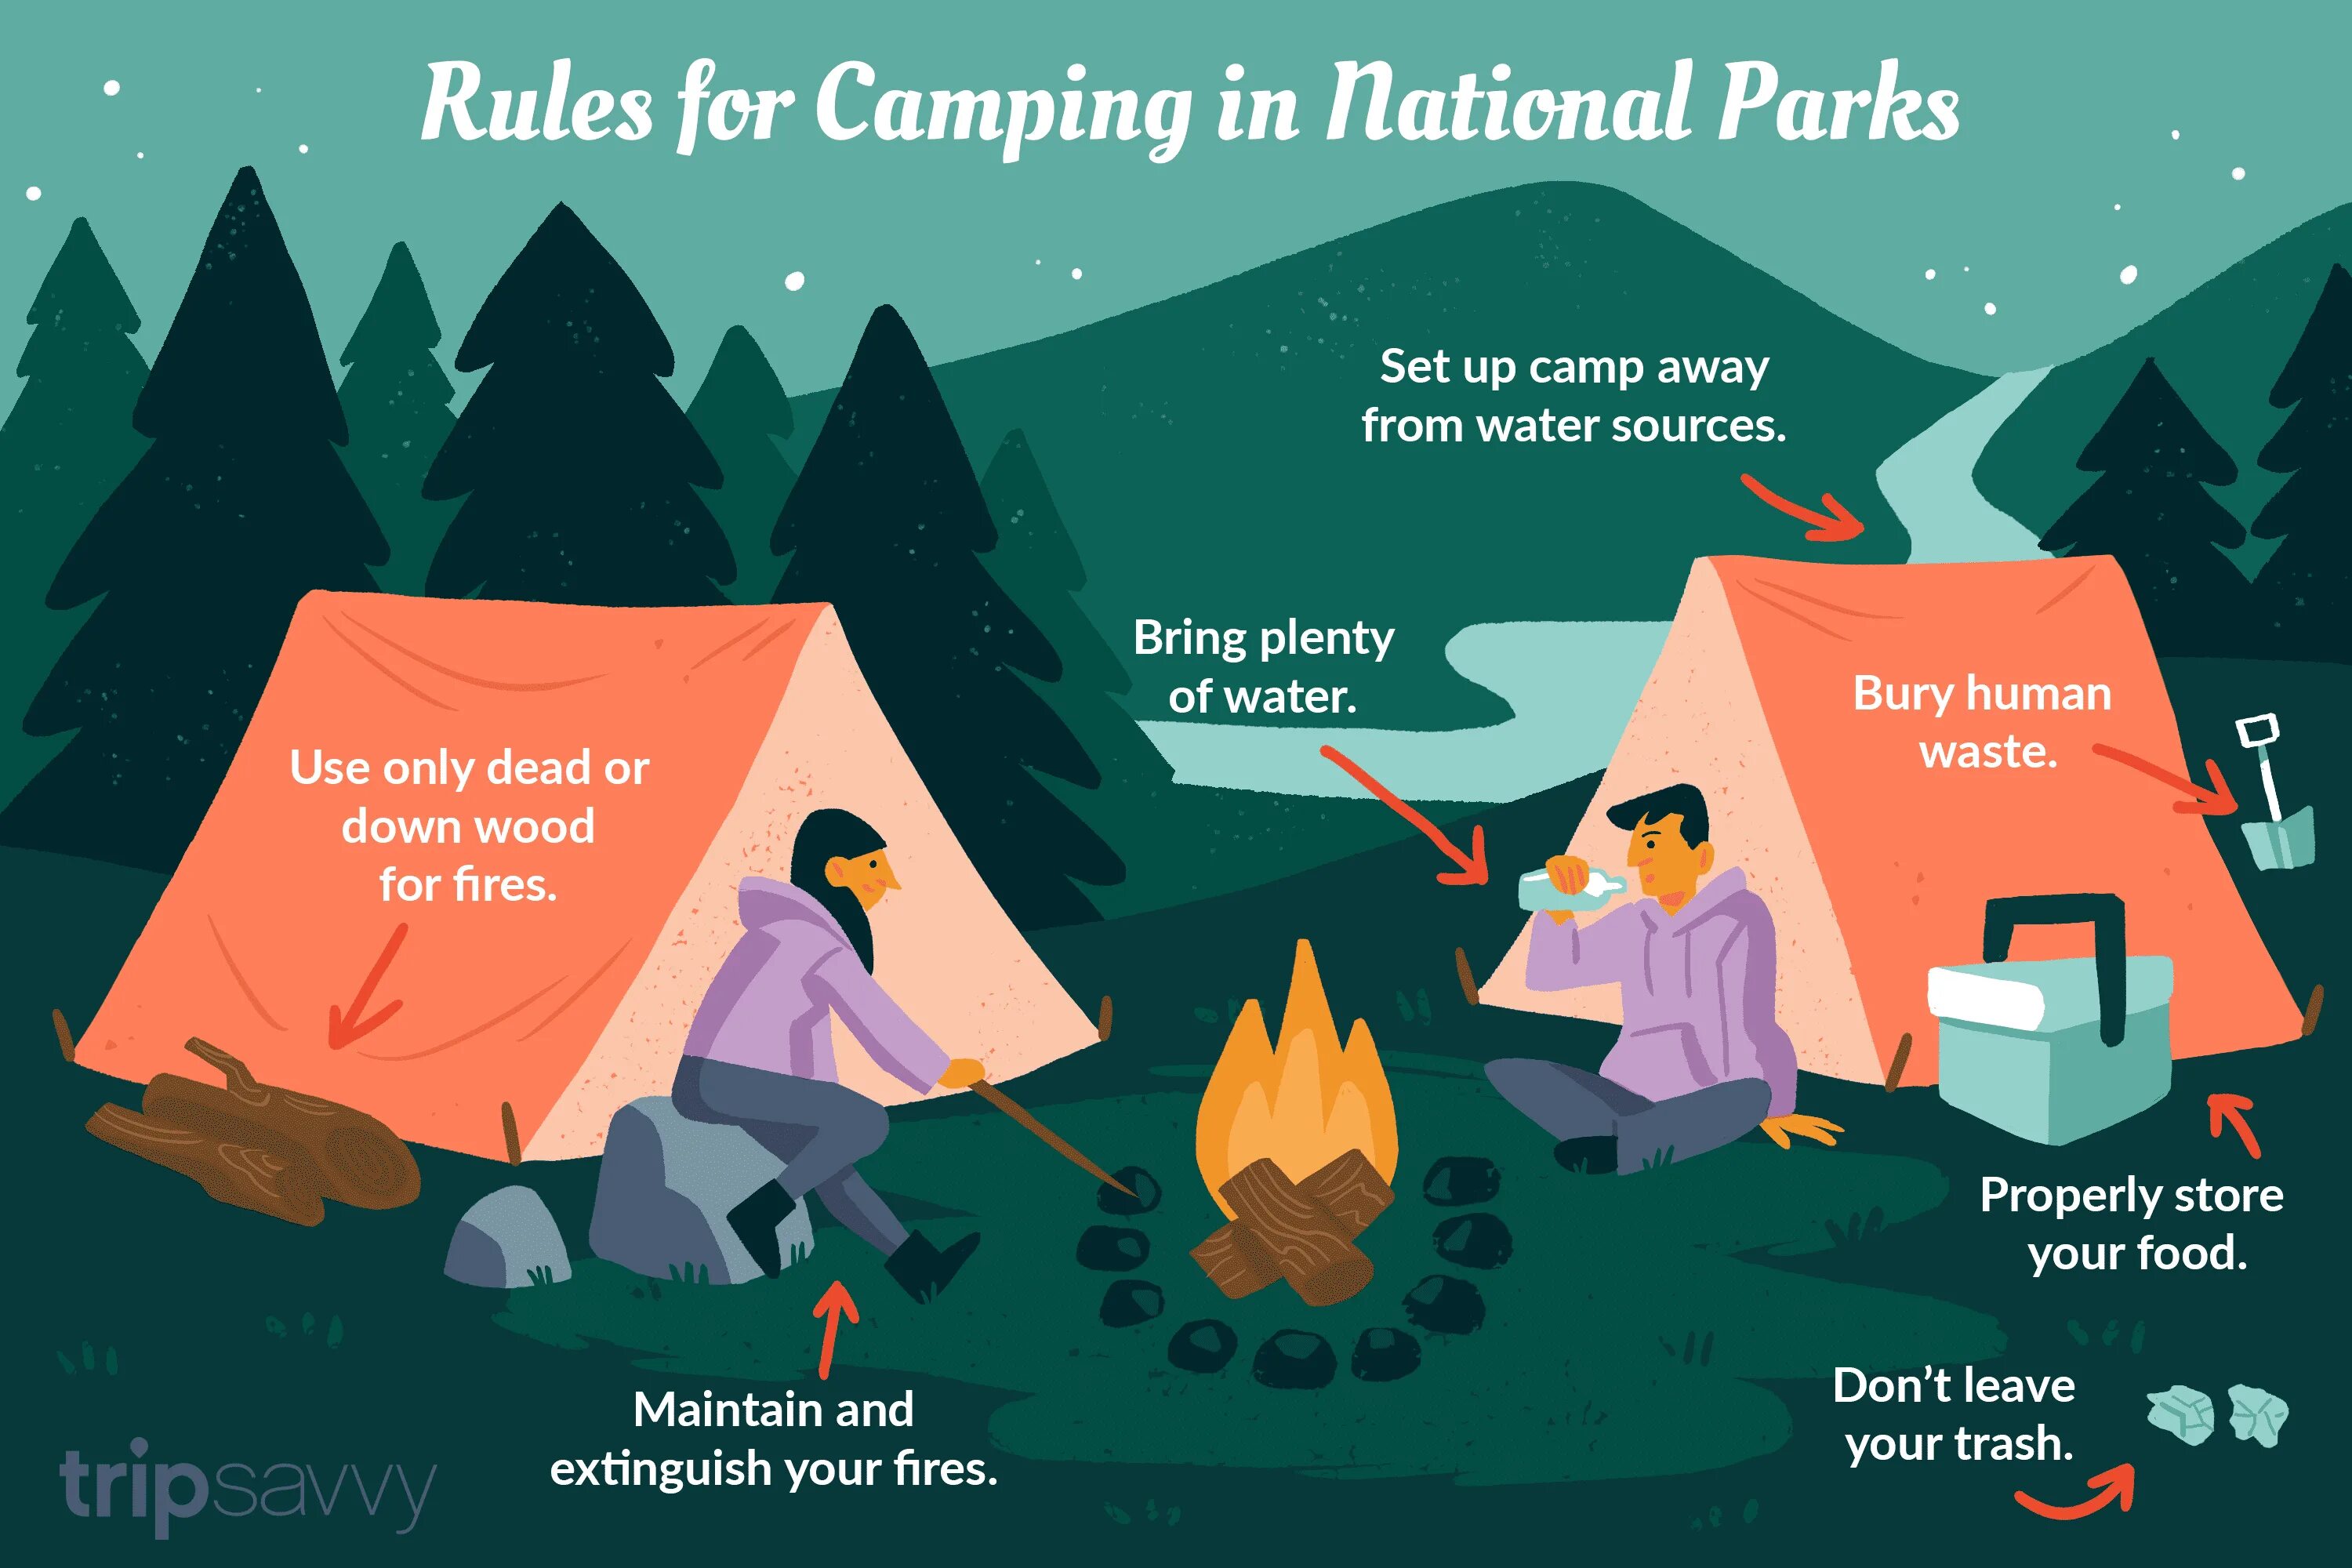 Camping rules. Rules in the Camp. Camp Rules. Rules at the Campsite.